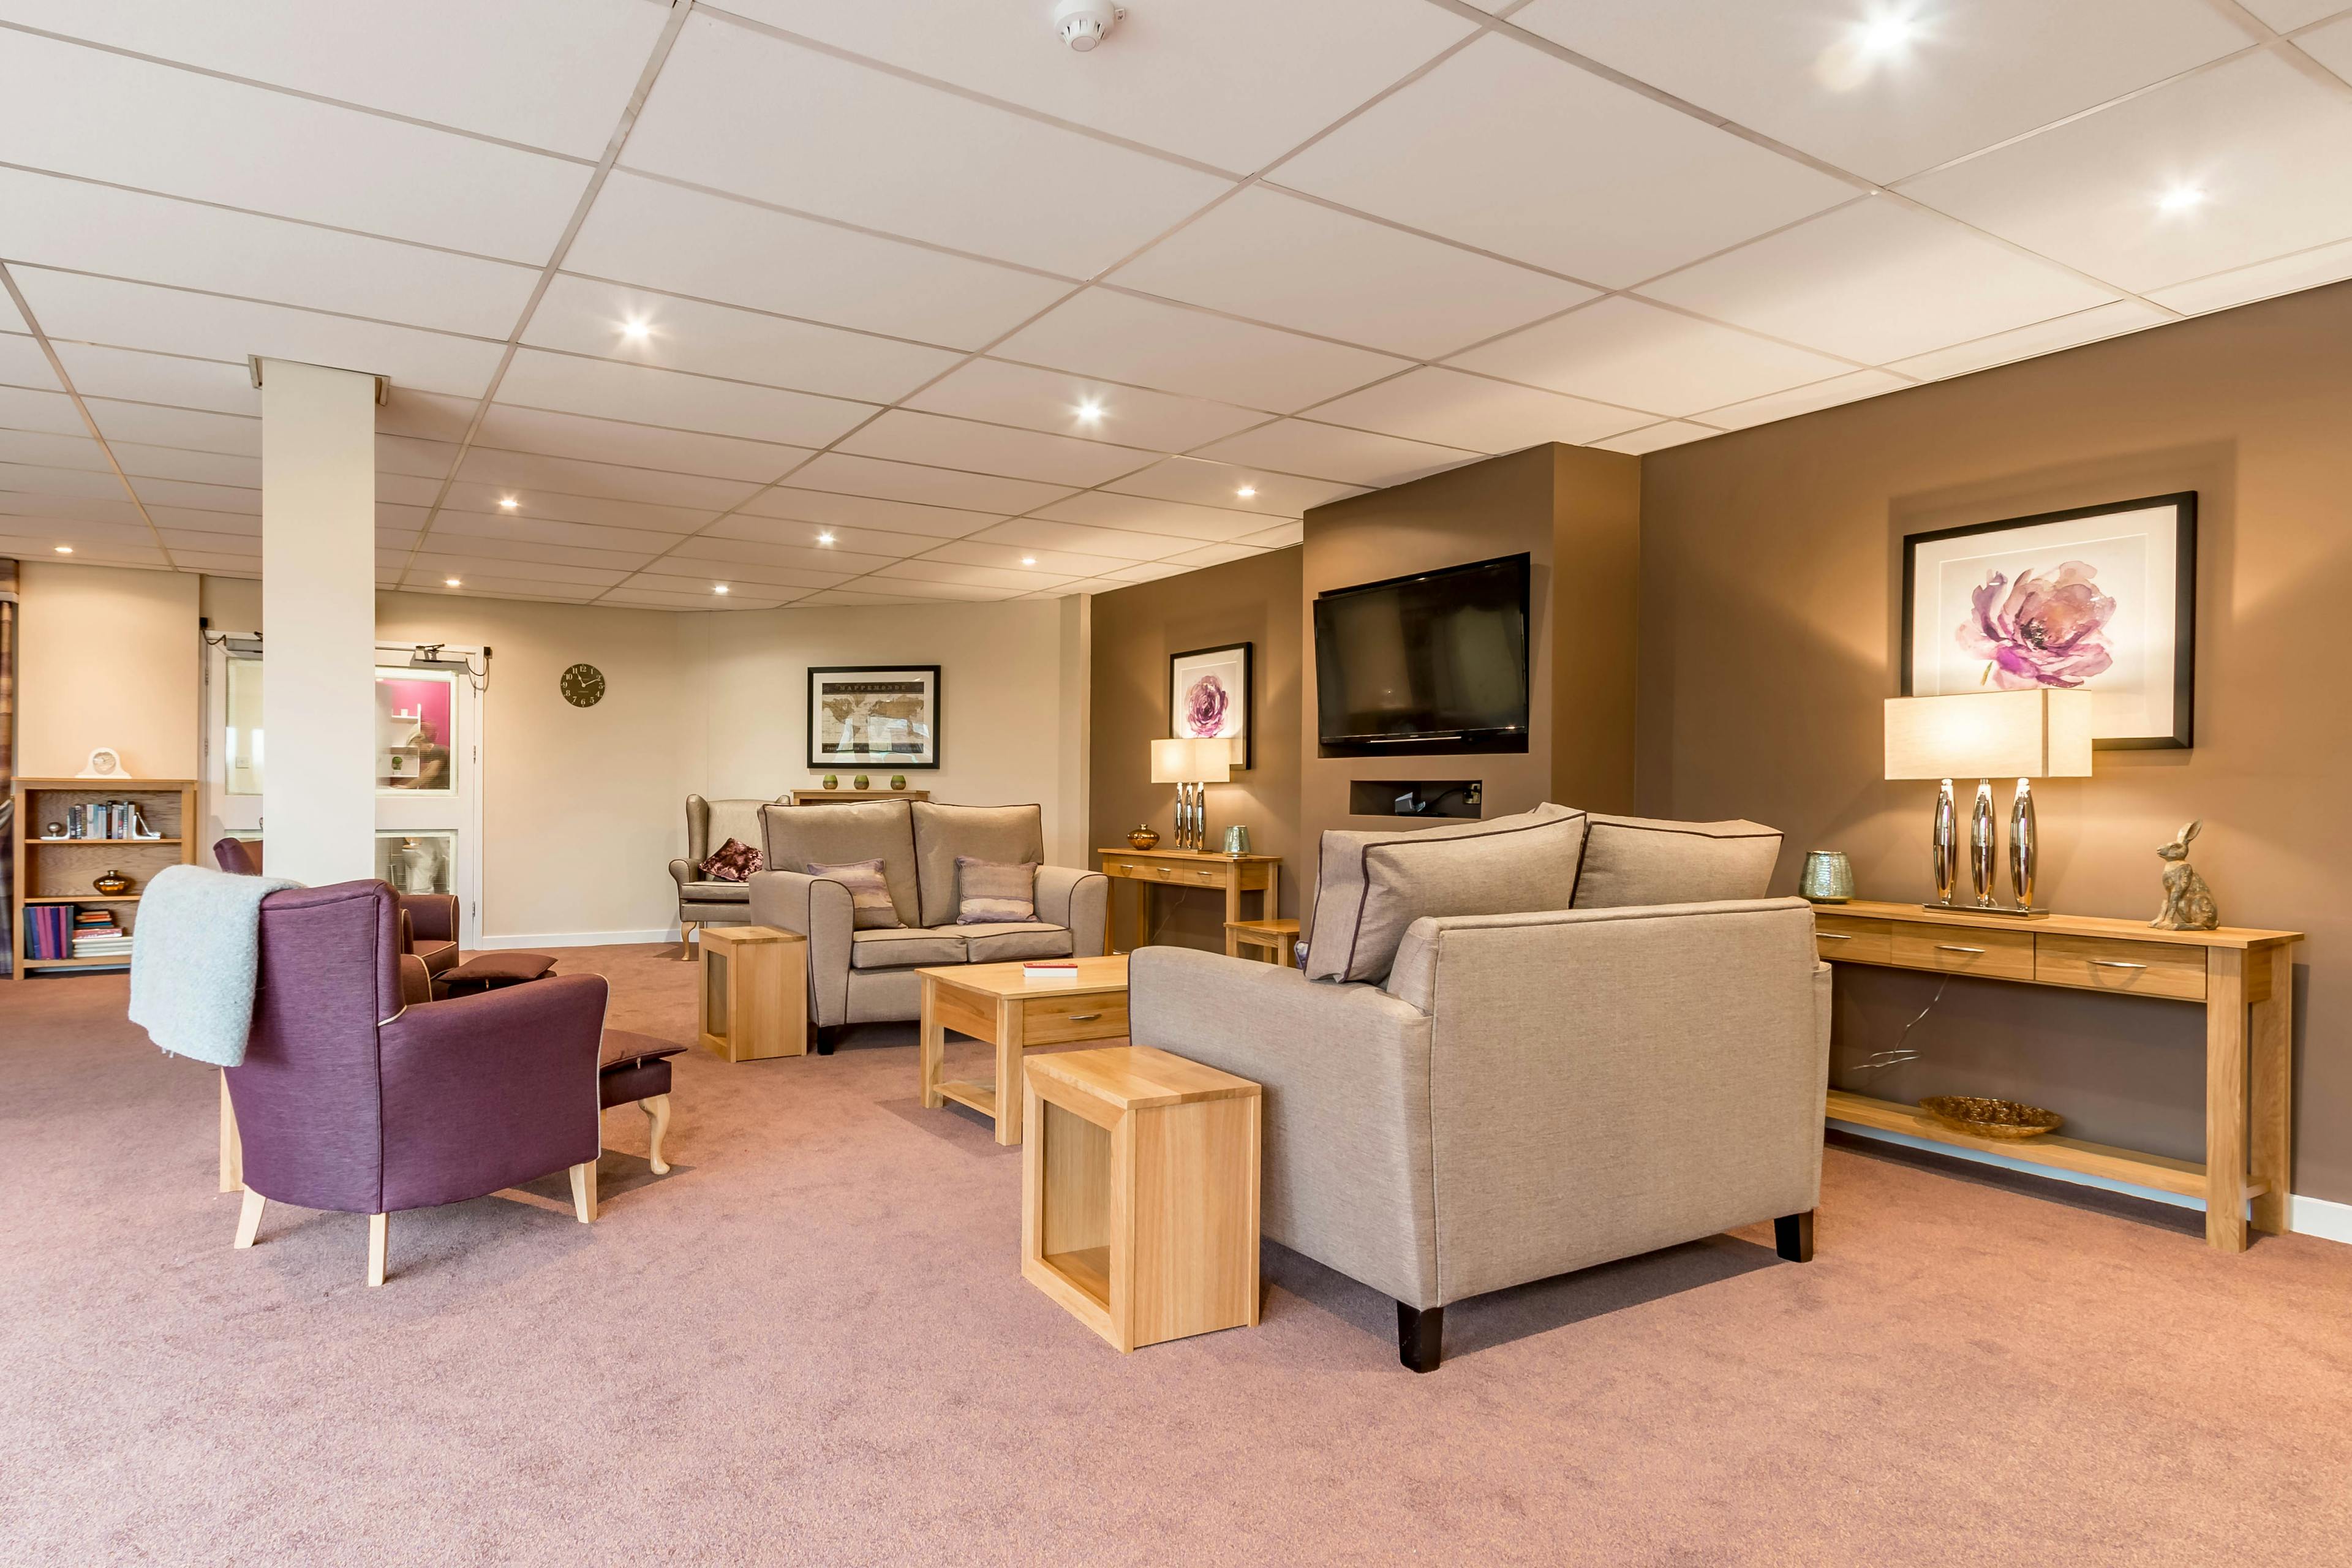 Lounge of Hafan-Y-Coed Care Home in Llanelli, Wales